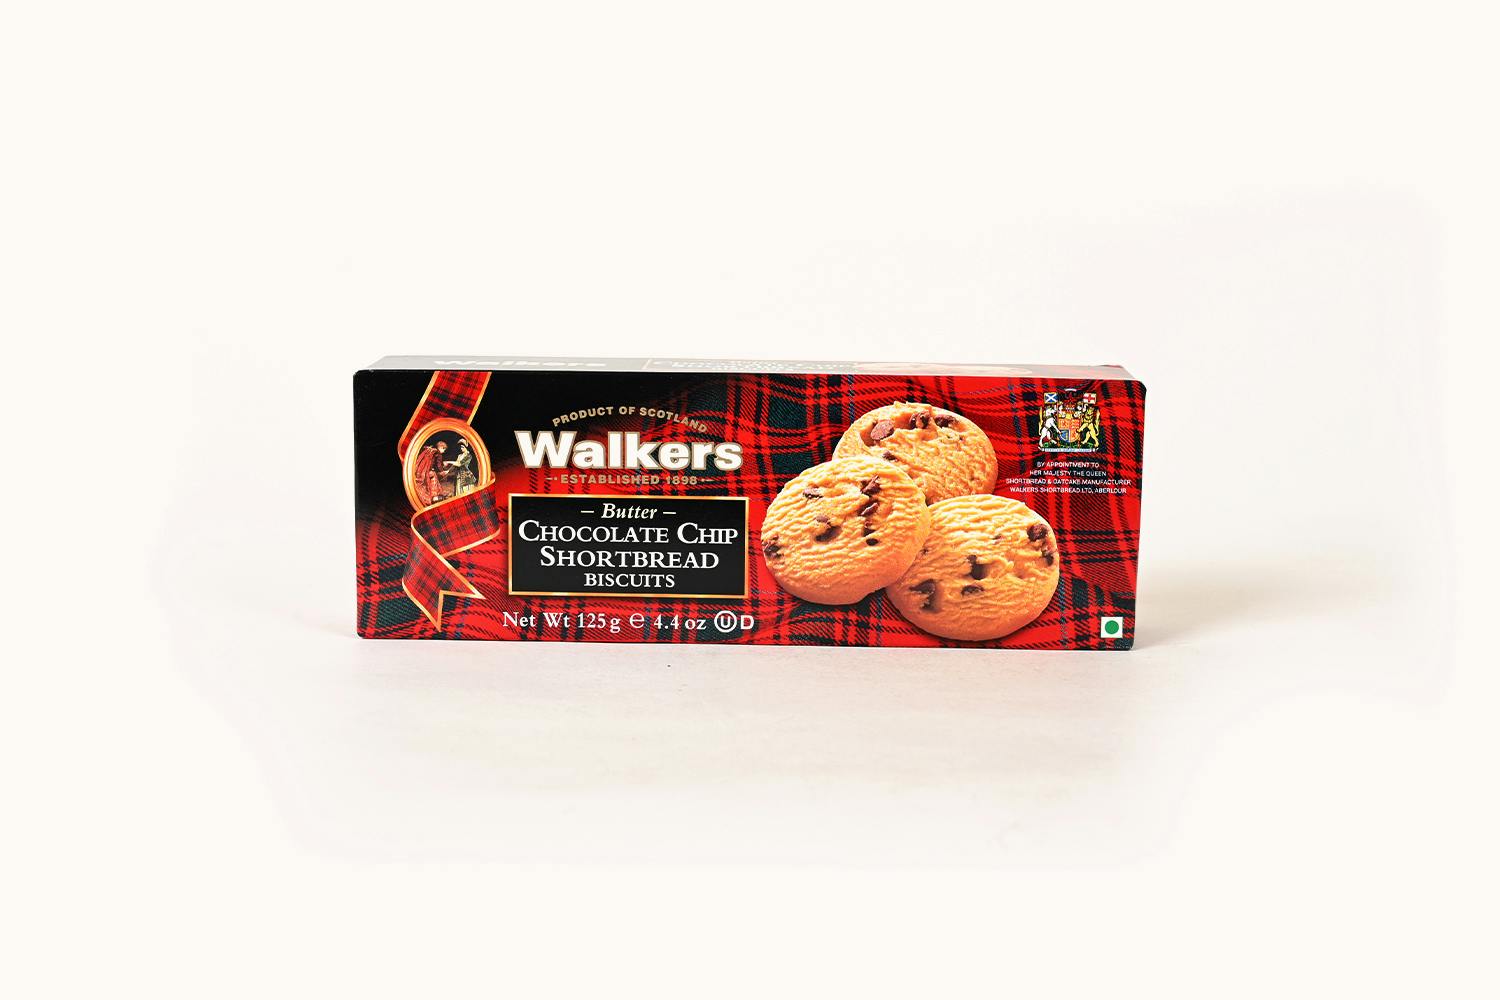 Walkers Butter Chocolate Chip Shortbread Biscuits